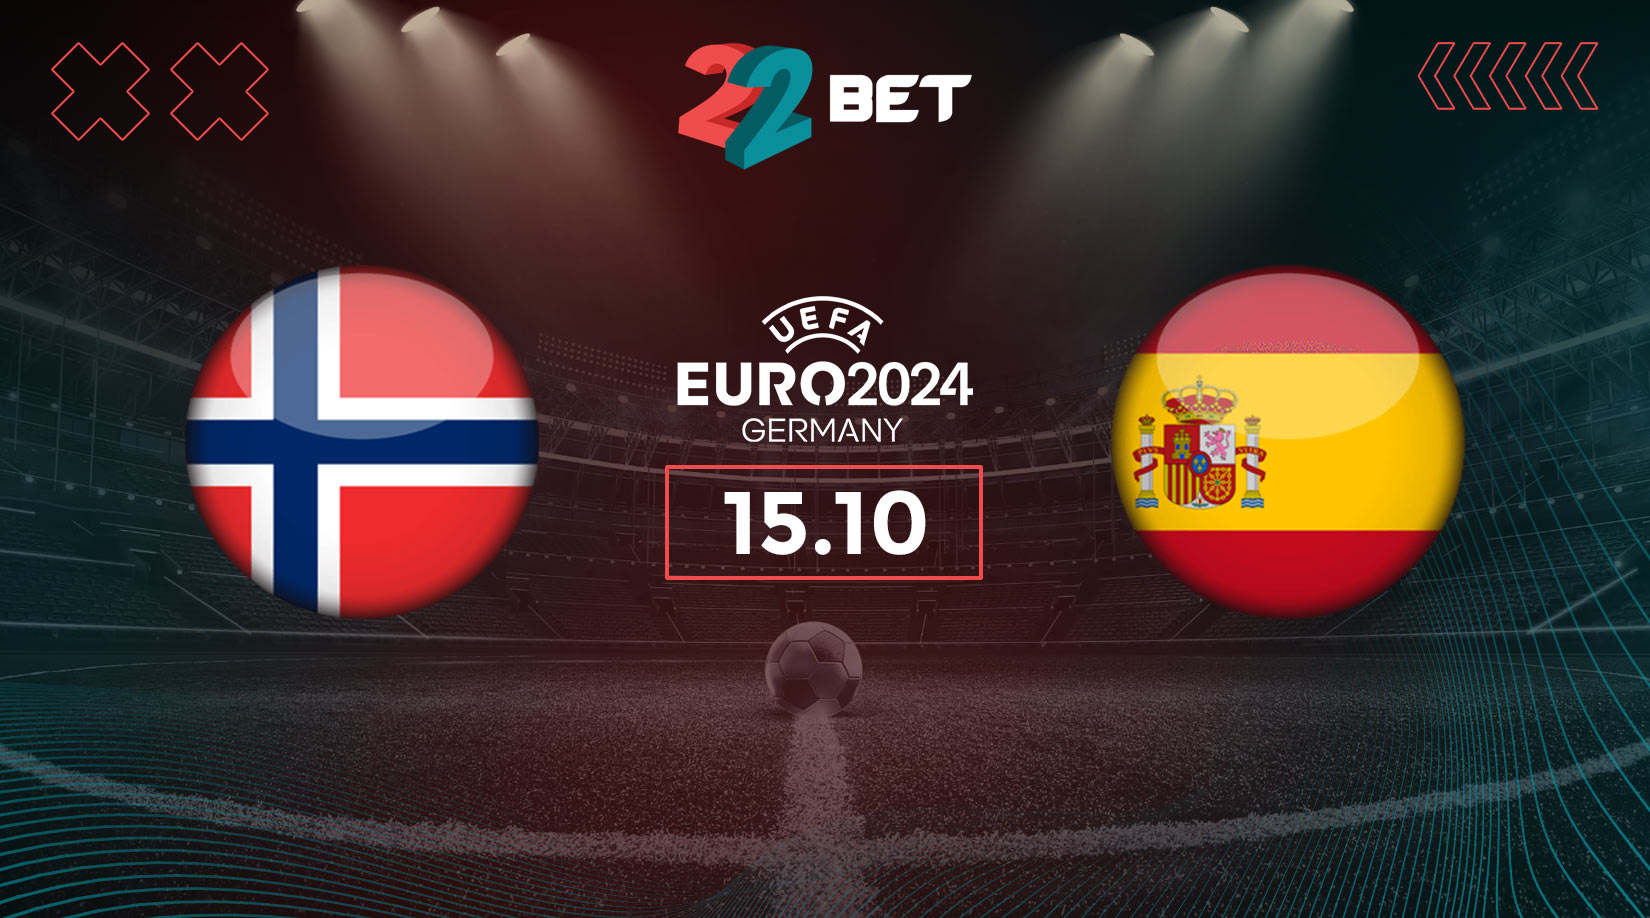 Norway vs Spain Prediction: Euro 2024 Match on 15.10.2023